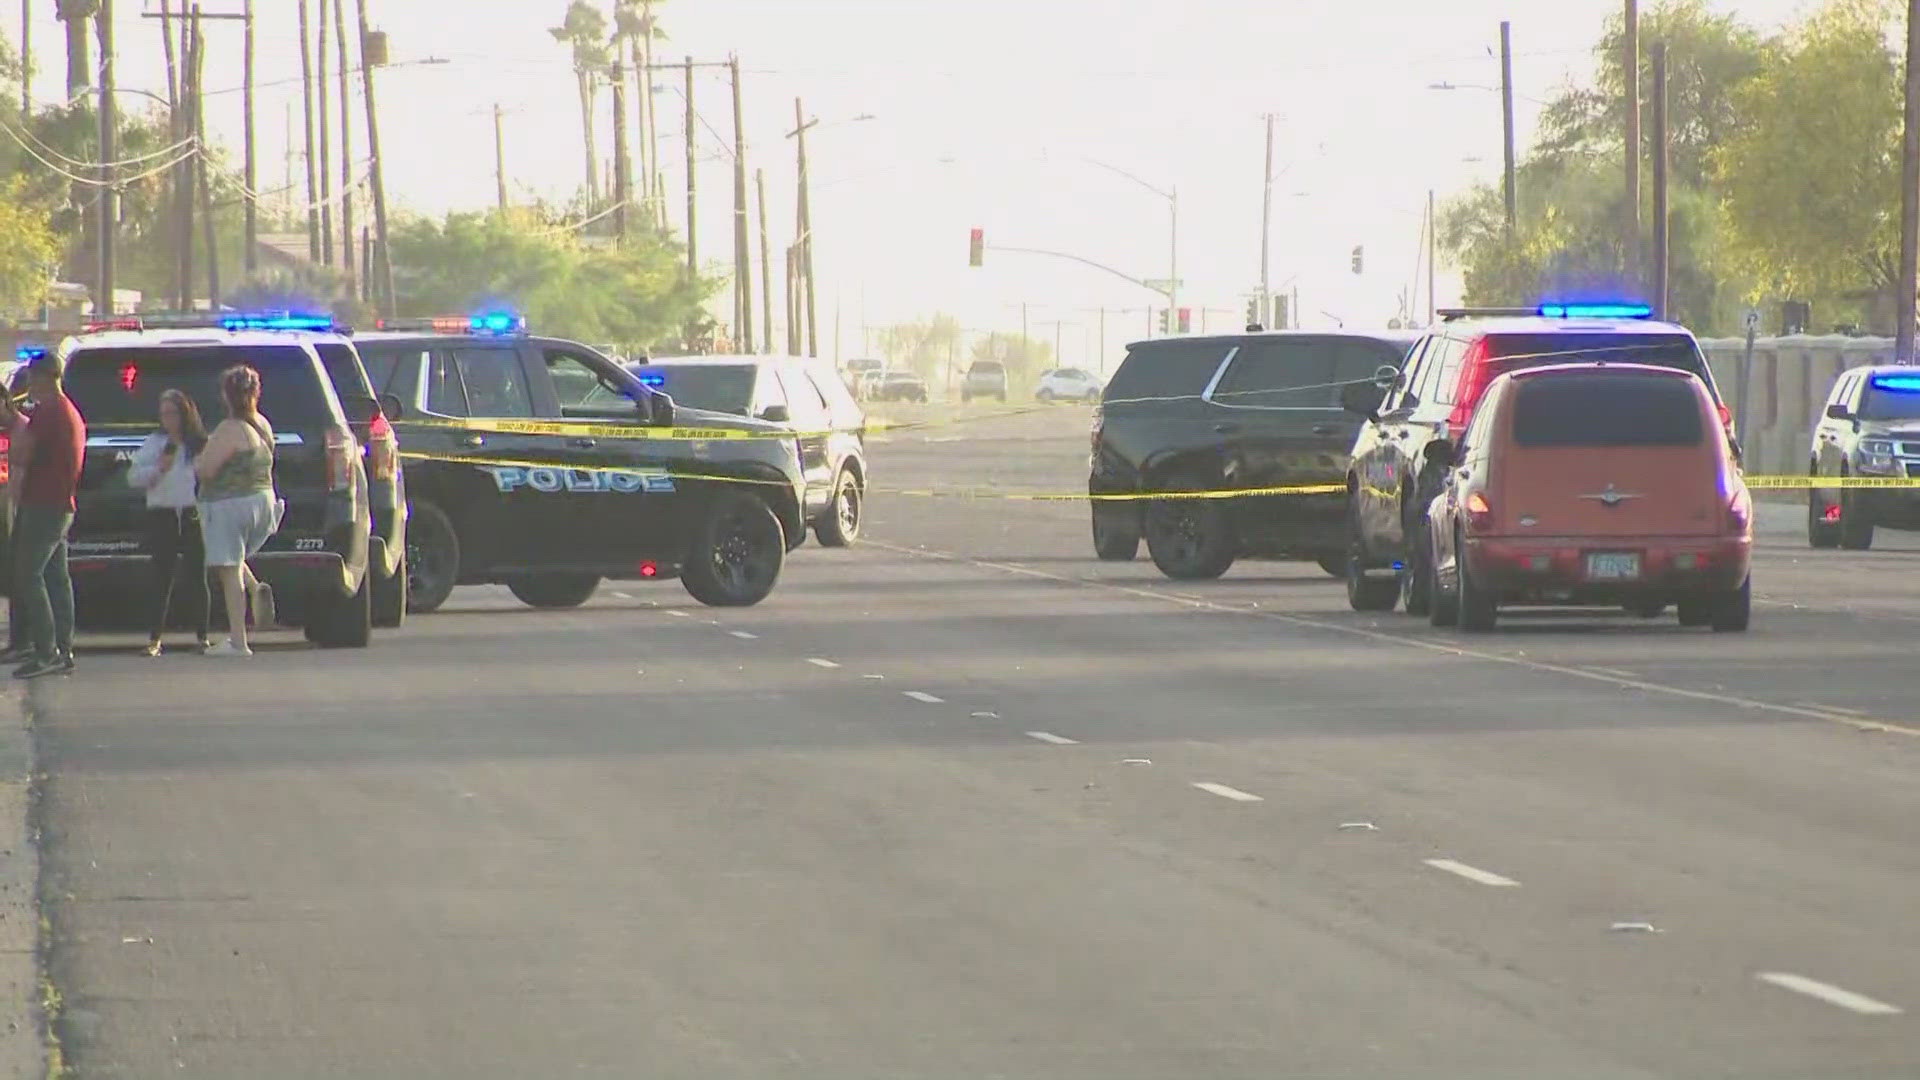 The double shooting happened in Avondale, a town west of Phoenix, on Friday afternoon. Watch the video above for more details.